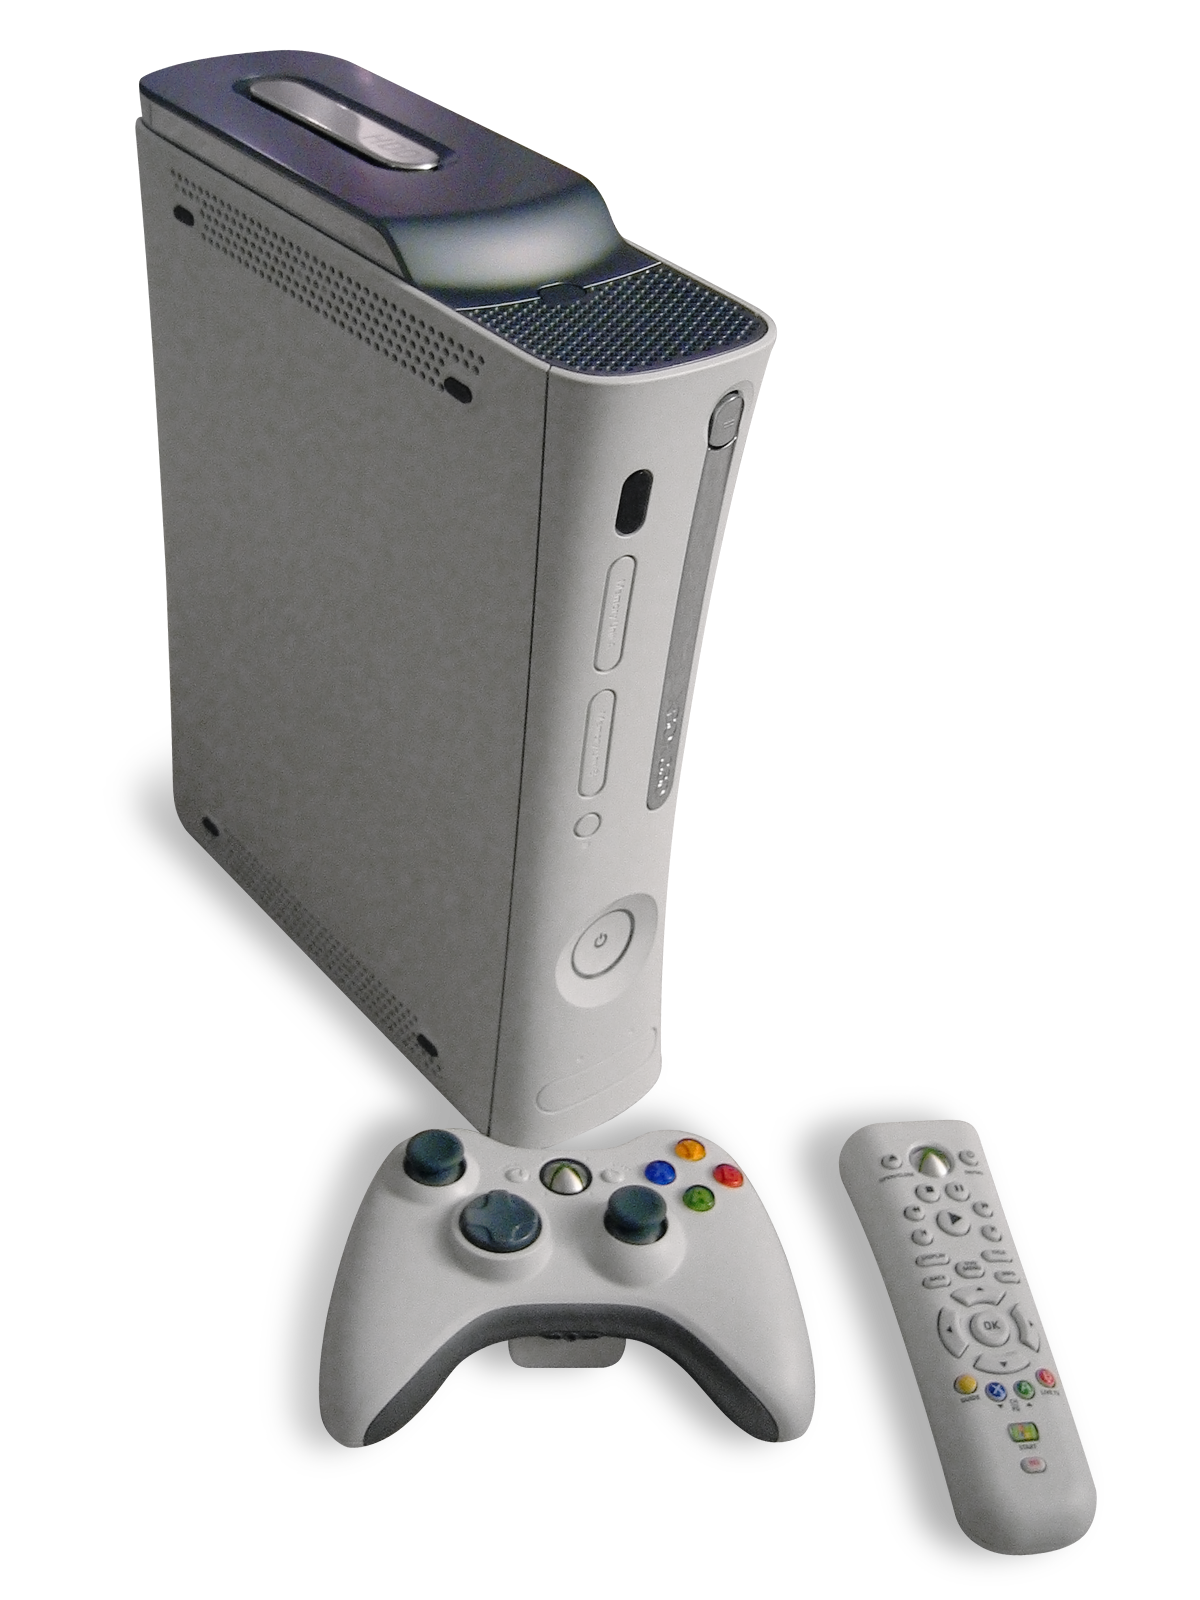 File:Xbox 360 Silver.png